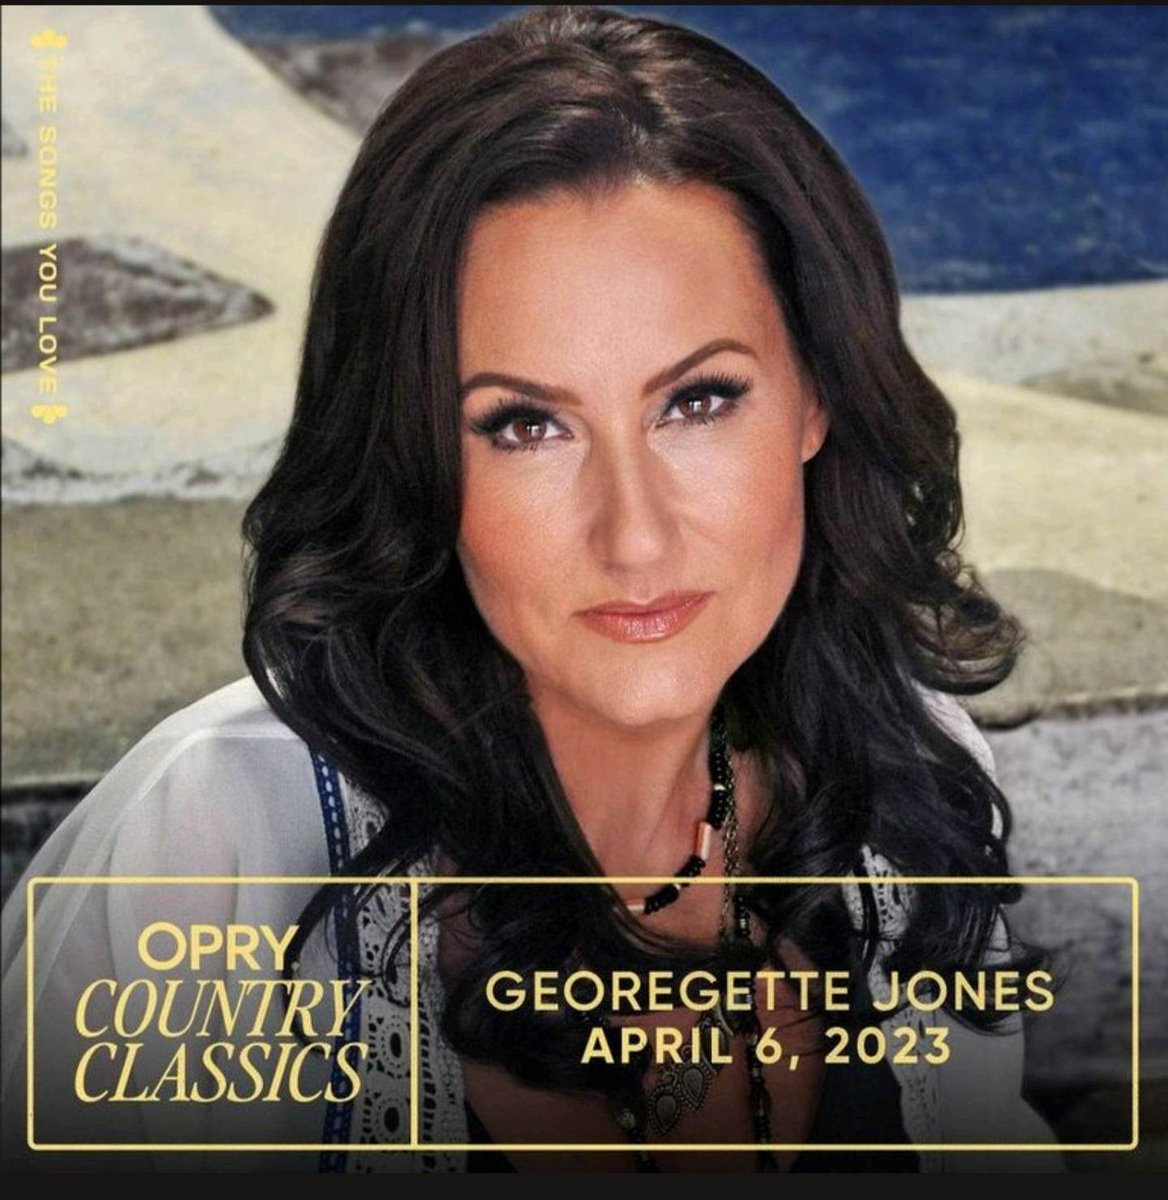 Tonight, we celebrate Mom as we remember her on this 25 year anniversary of her passing at the @opry for the #OpryCounrryClassics. Listen on @WSMradio or come see us live. Mom would be so proud 💗